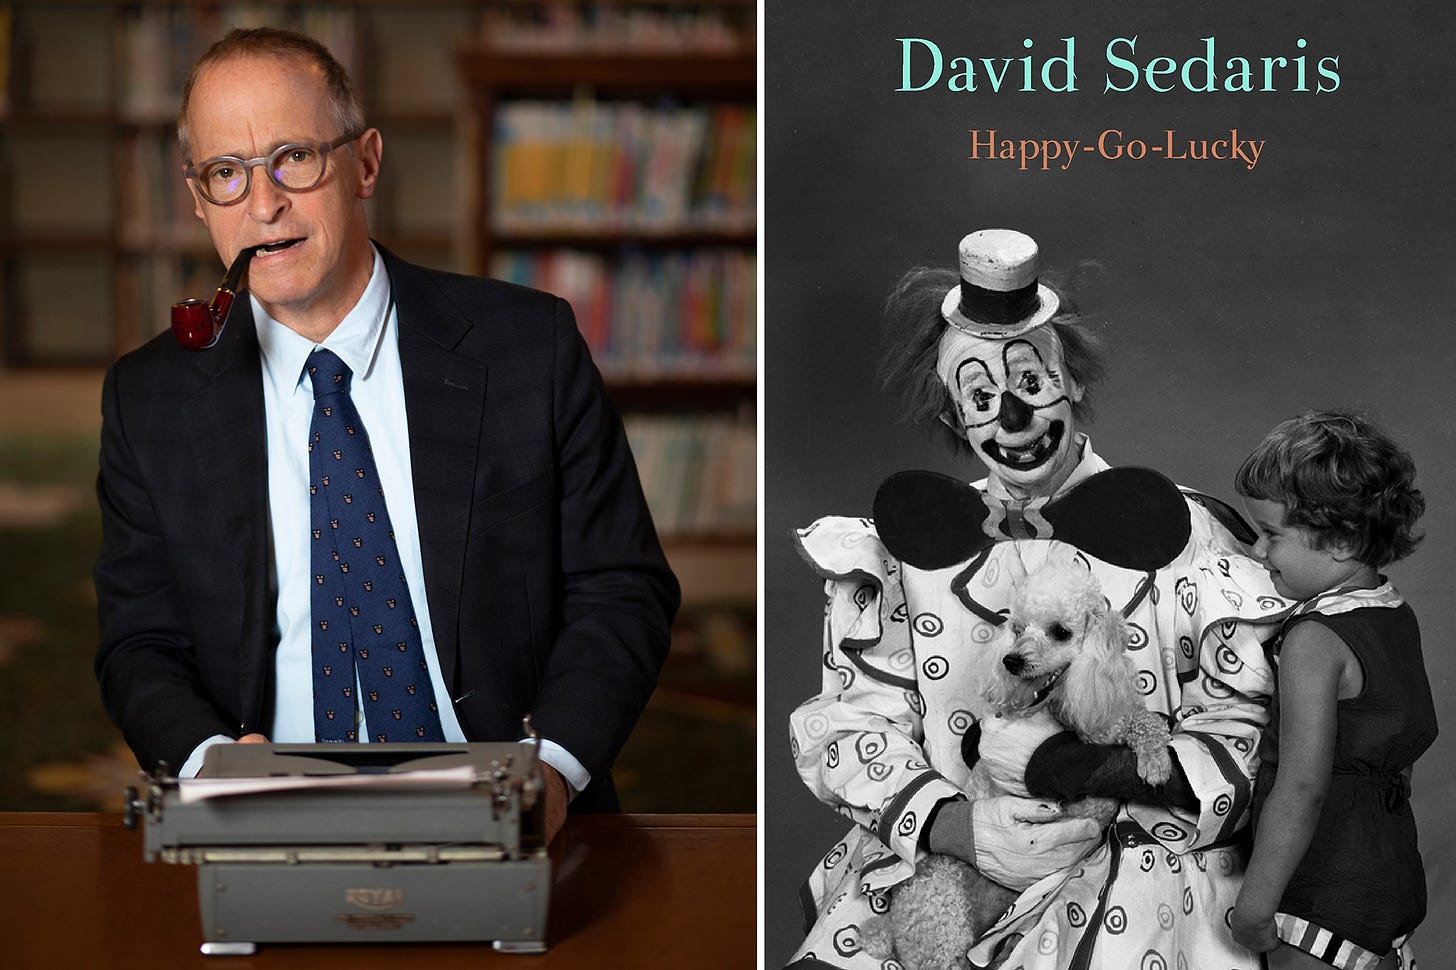 Here are the NYC encounters David Sedaris hasn't written about